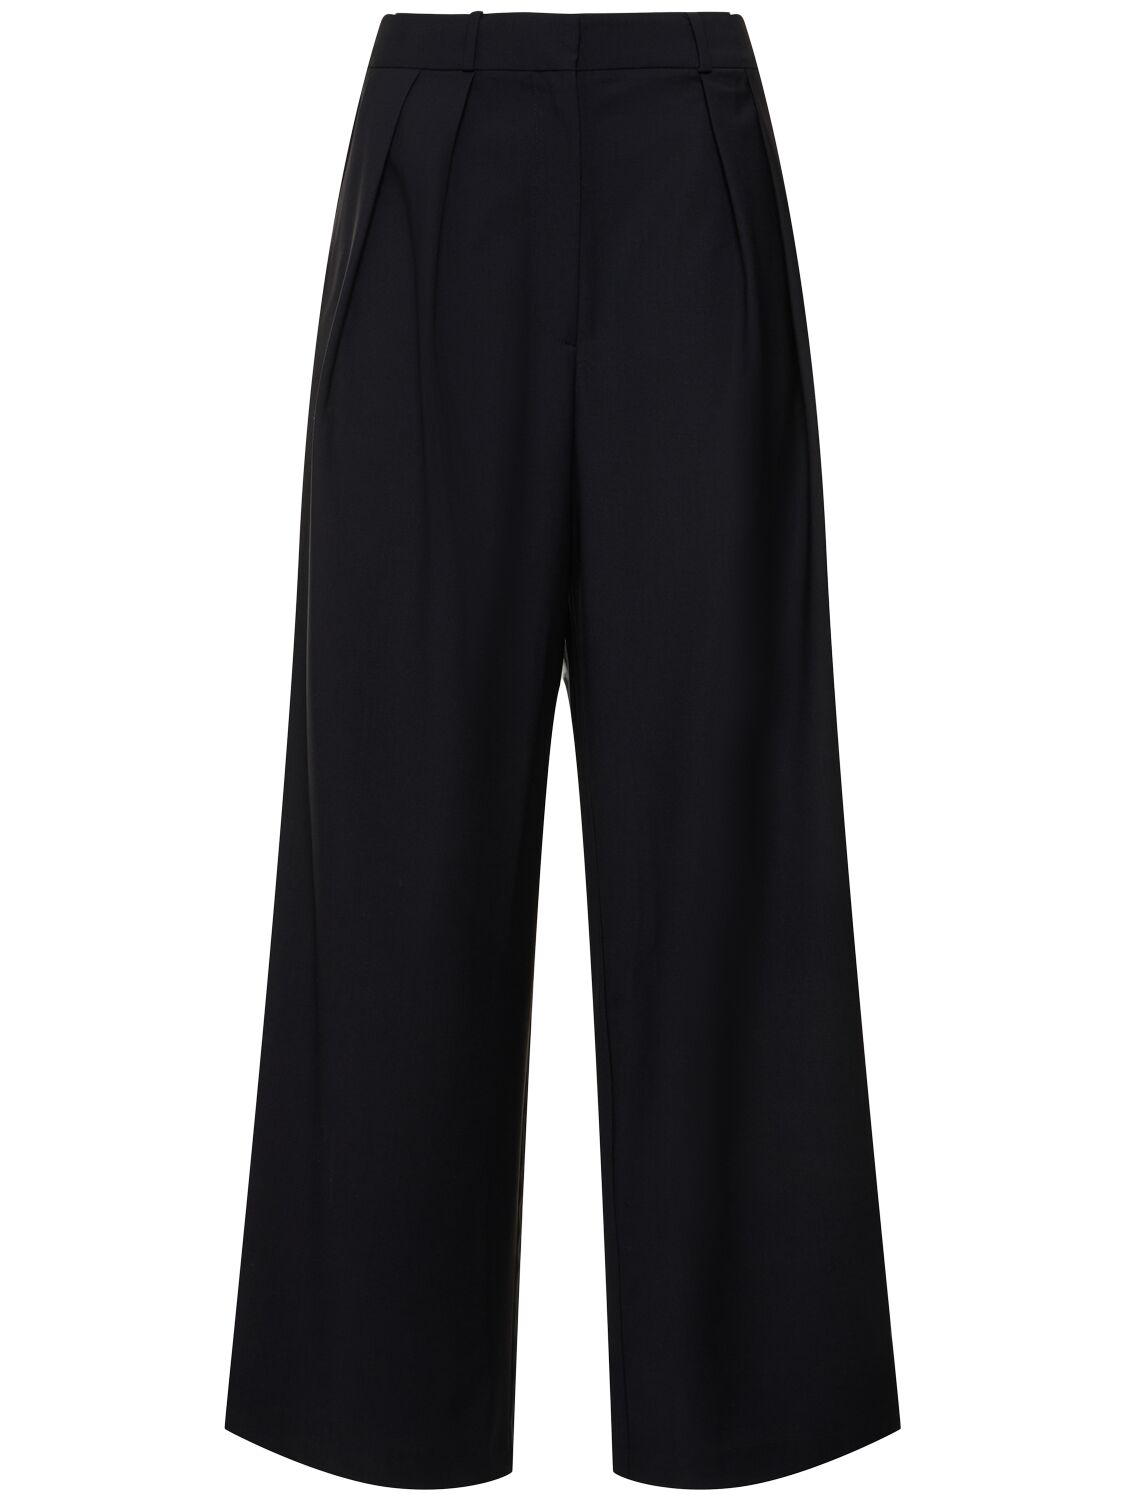 Image of Ripley Pleated Viscose Blend Pants